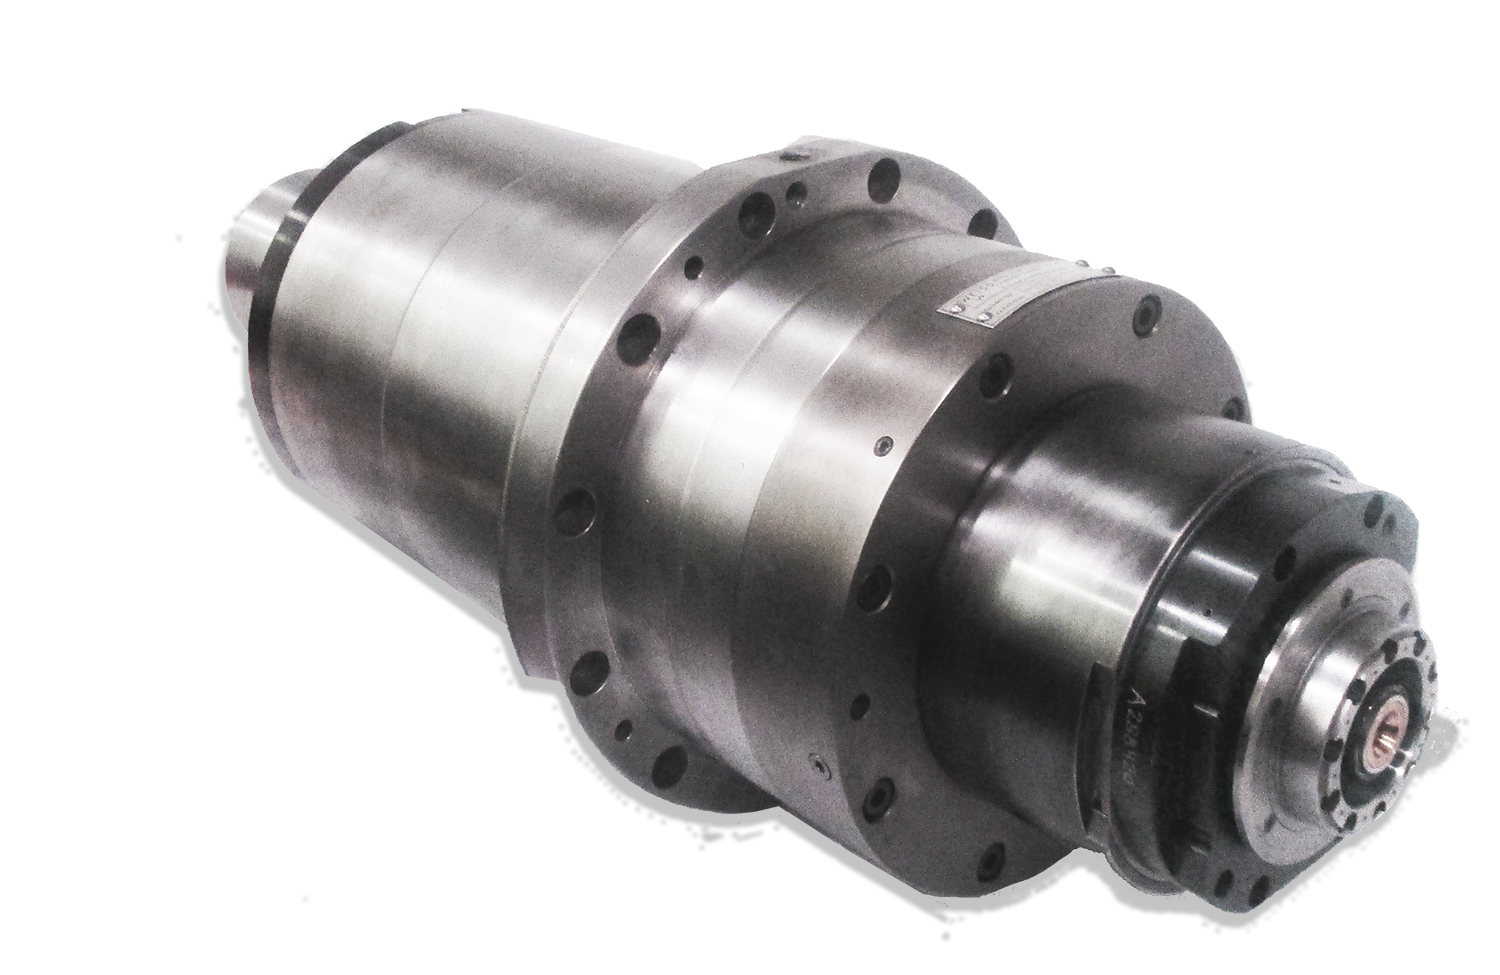 What is a CNC Spindle? - Motor City Spindle Repair